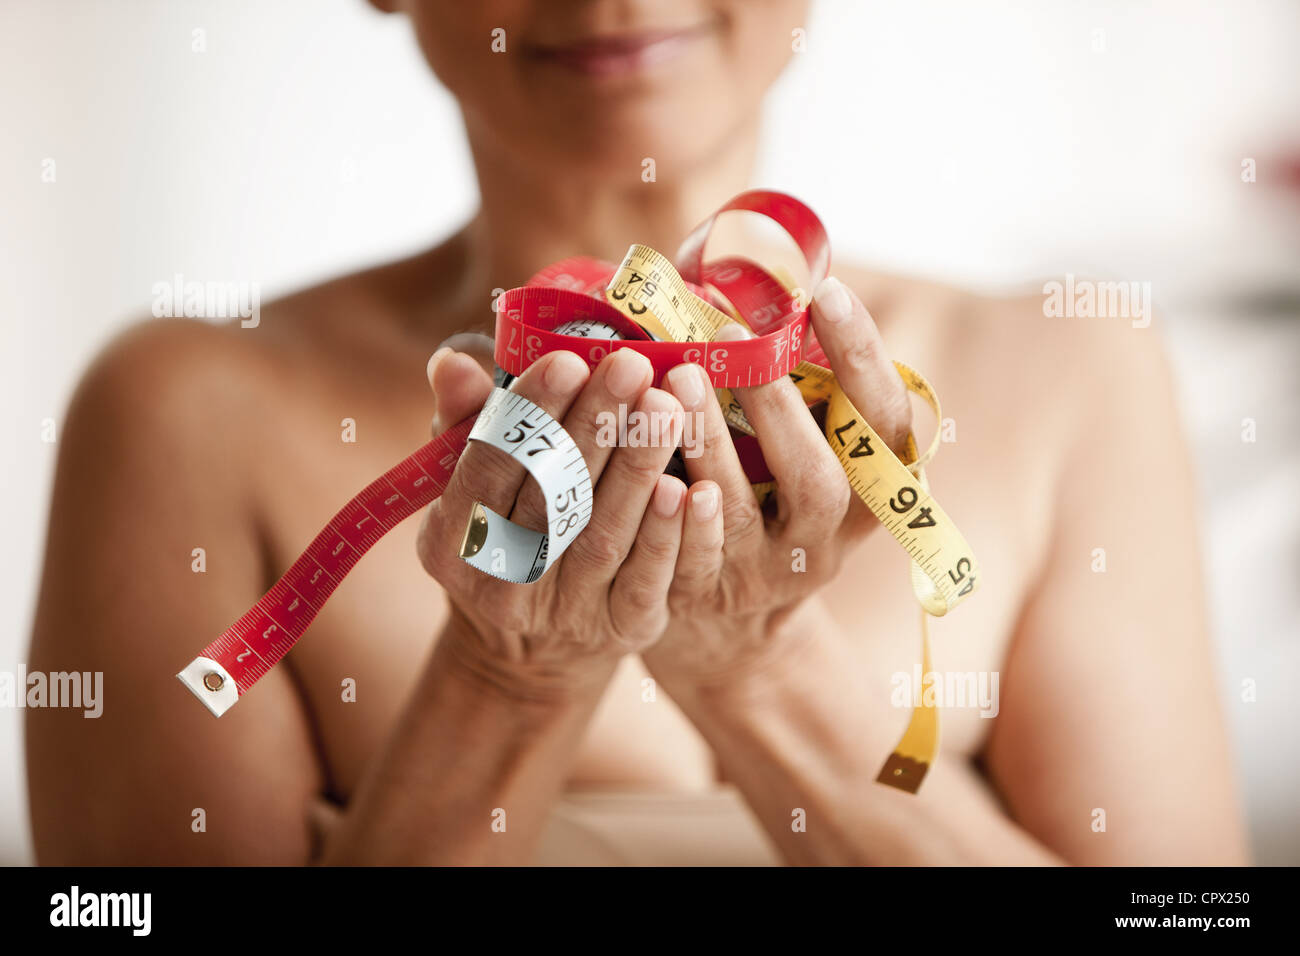 Senior woman holding measuring tapes in hands Stock Photo